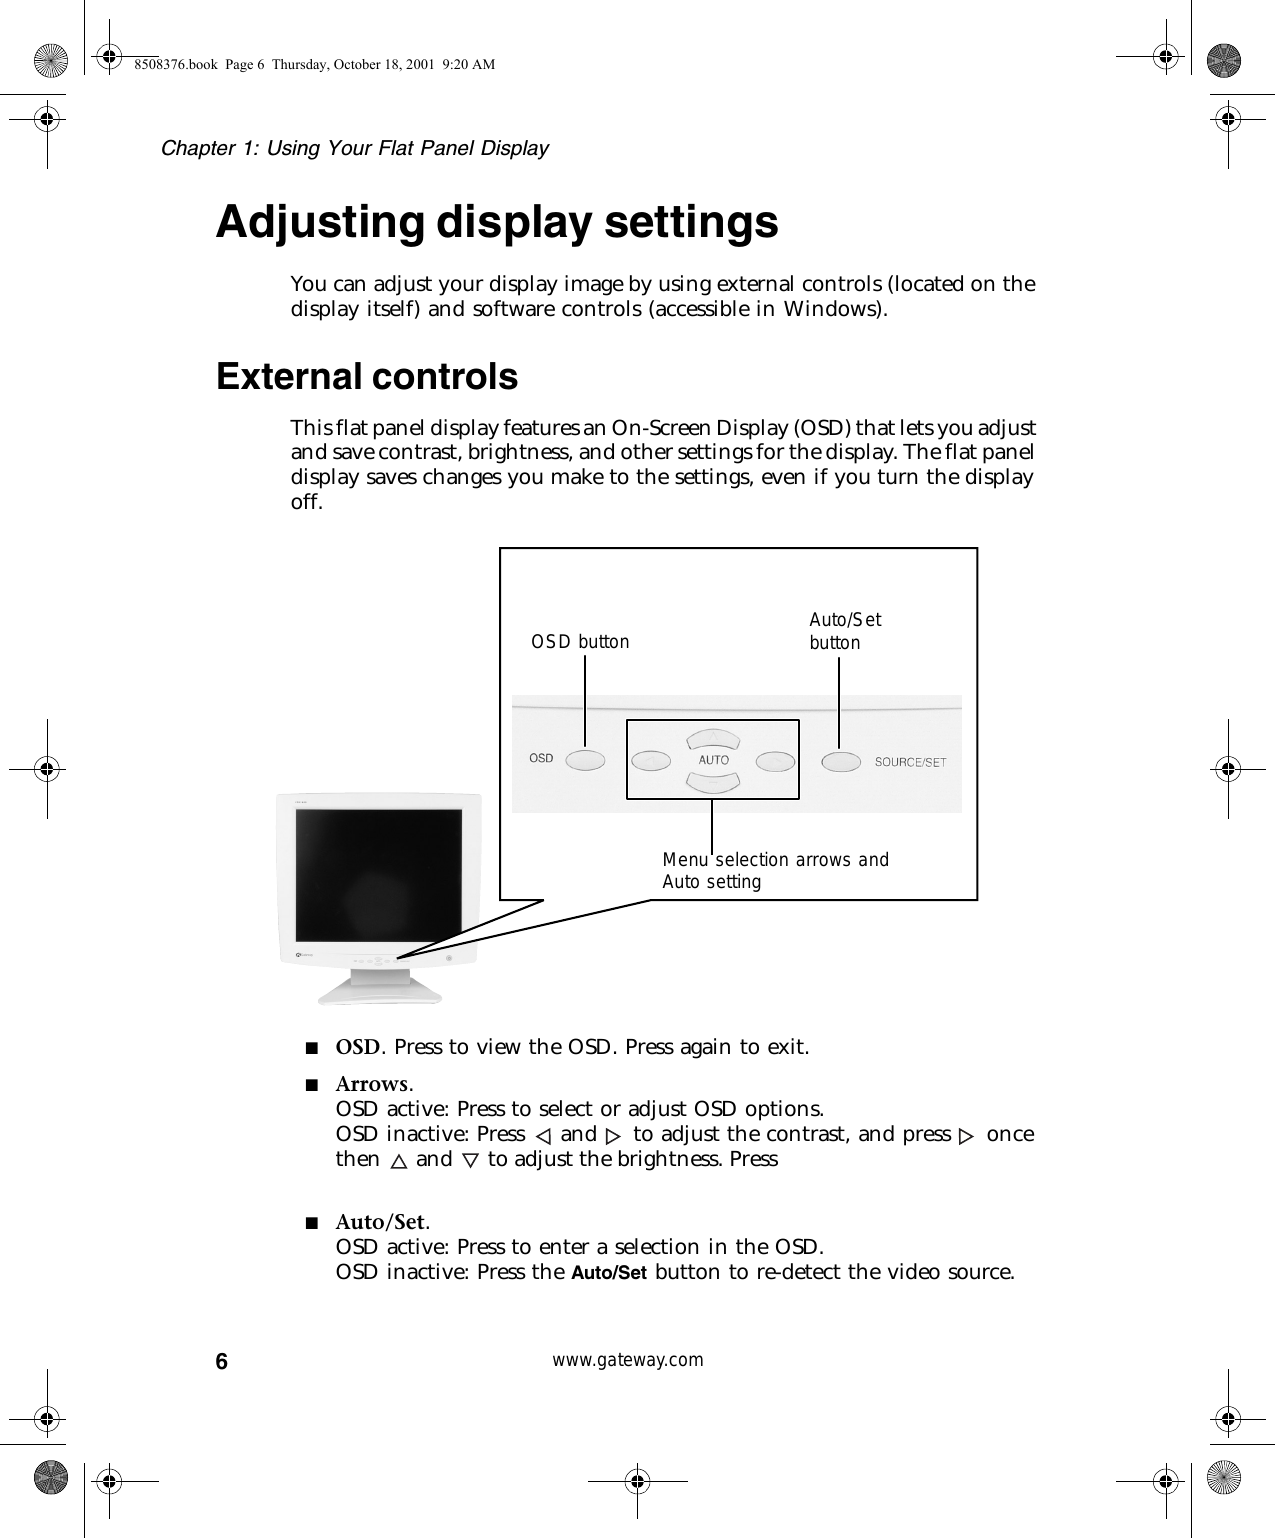 6Chapter 1: Using Your Flat Panel Displaywww.gateway.comAdjusting display settingsYou can adjust your display image by using external controls (located on the display itself) and software controls (accessible in Windows).External controlsThis flat panel display features an On-Screen Display (OSD) that lets you adjust and save contrast, brightness, and other settings for the display. The flat panel display saves changes you make to the settings, even if you turn the display off.■OSD. Press to view the OSD. Press again to exit.■Arrows.OSD active: Press to select or adjust OSD options.OSD inactive: Press  and  to adjust the contrast, and press  once then and to adjust the brightness. Press ■Auto/Set.OSD active: Press to enter a selection in the OSD.OSD inactive: Press the Auto/Set button to re-detect the video source.Menu selection arrows and Auto settingOSD button Auto/Set button8508376.book  Page 6  Thursday, October 18, 2001  9:20 AM